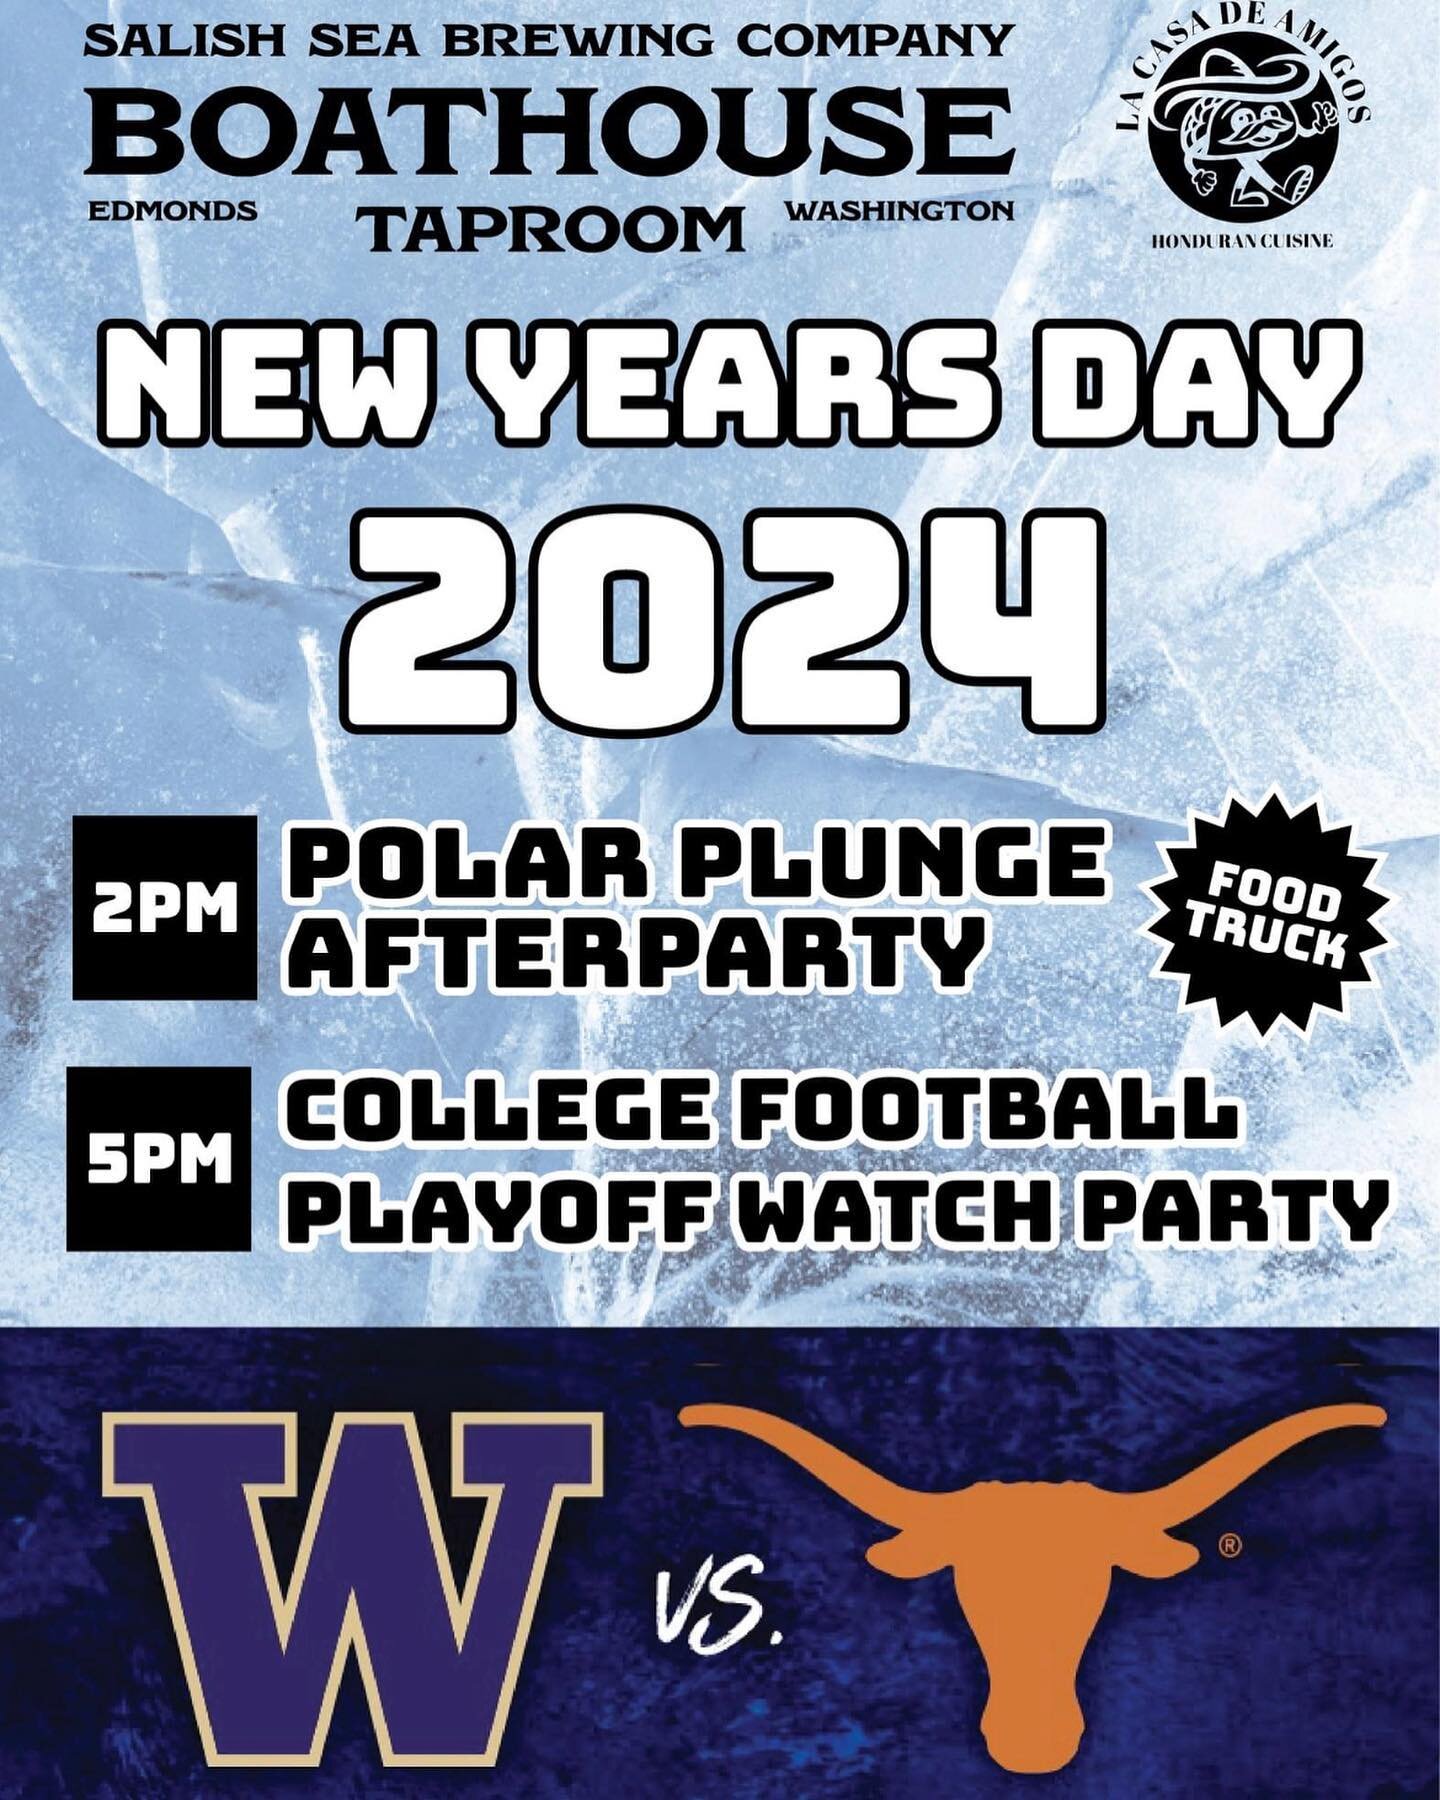 The Boathouse Taproom will be OPEN from Noon - 10pm New Years Day!

Polar Plunge after party &amp; Huskies playoff game. 

Food truck from @lacasadeamigospnw will be on location serving up tasty Honduran food.